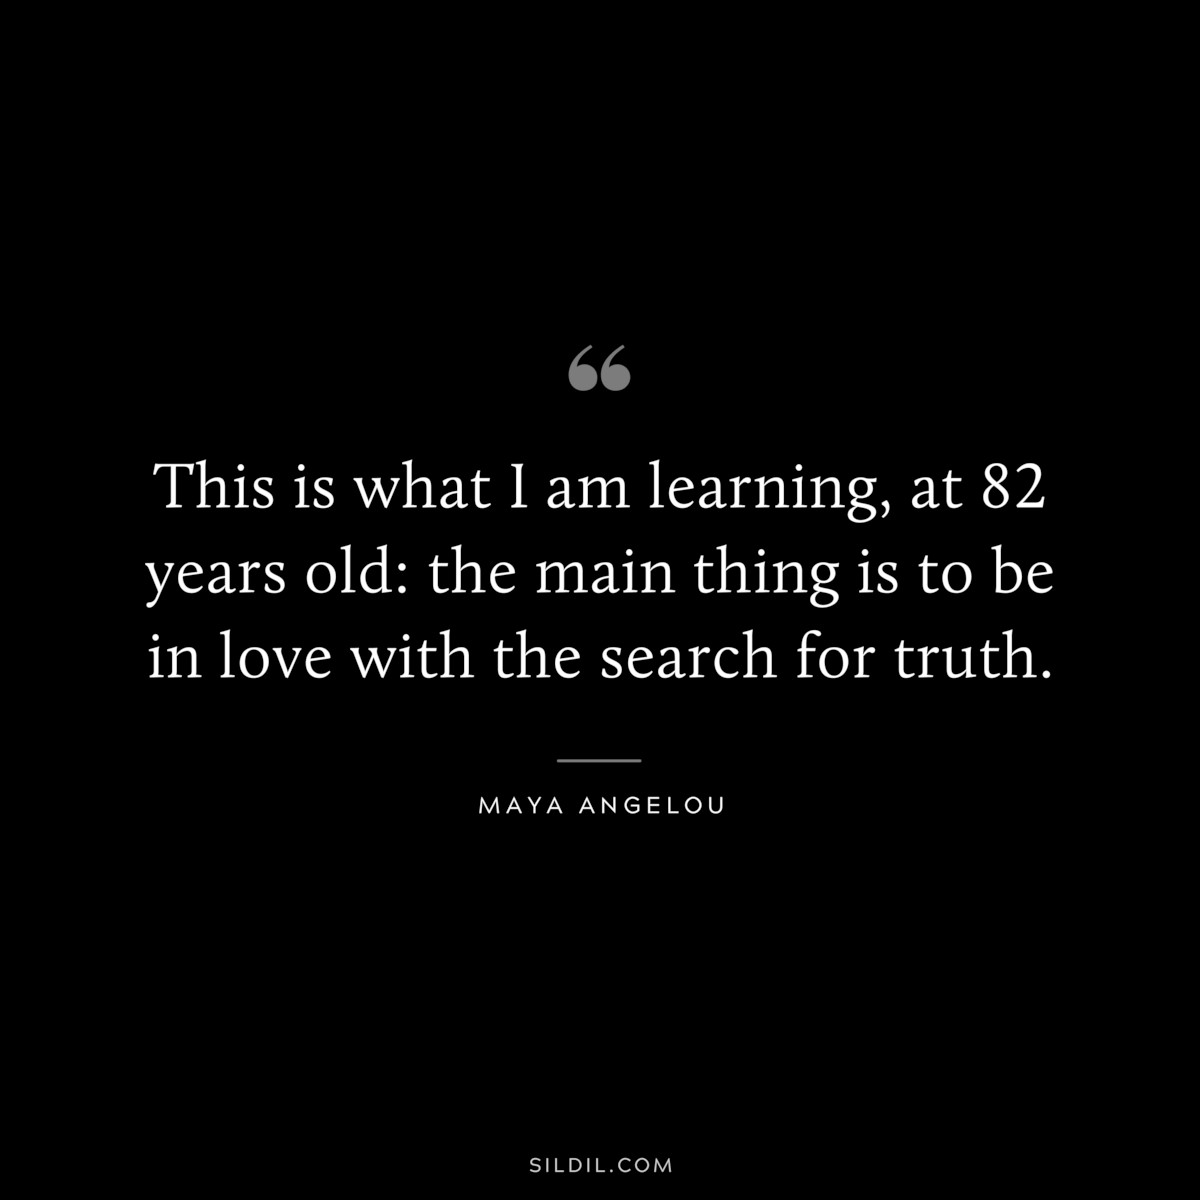 This is what I am learning, at 82 years old: the main thing is to be in love with the search for truth. ― Maya Angelou